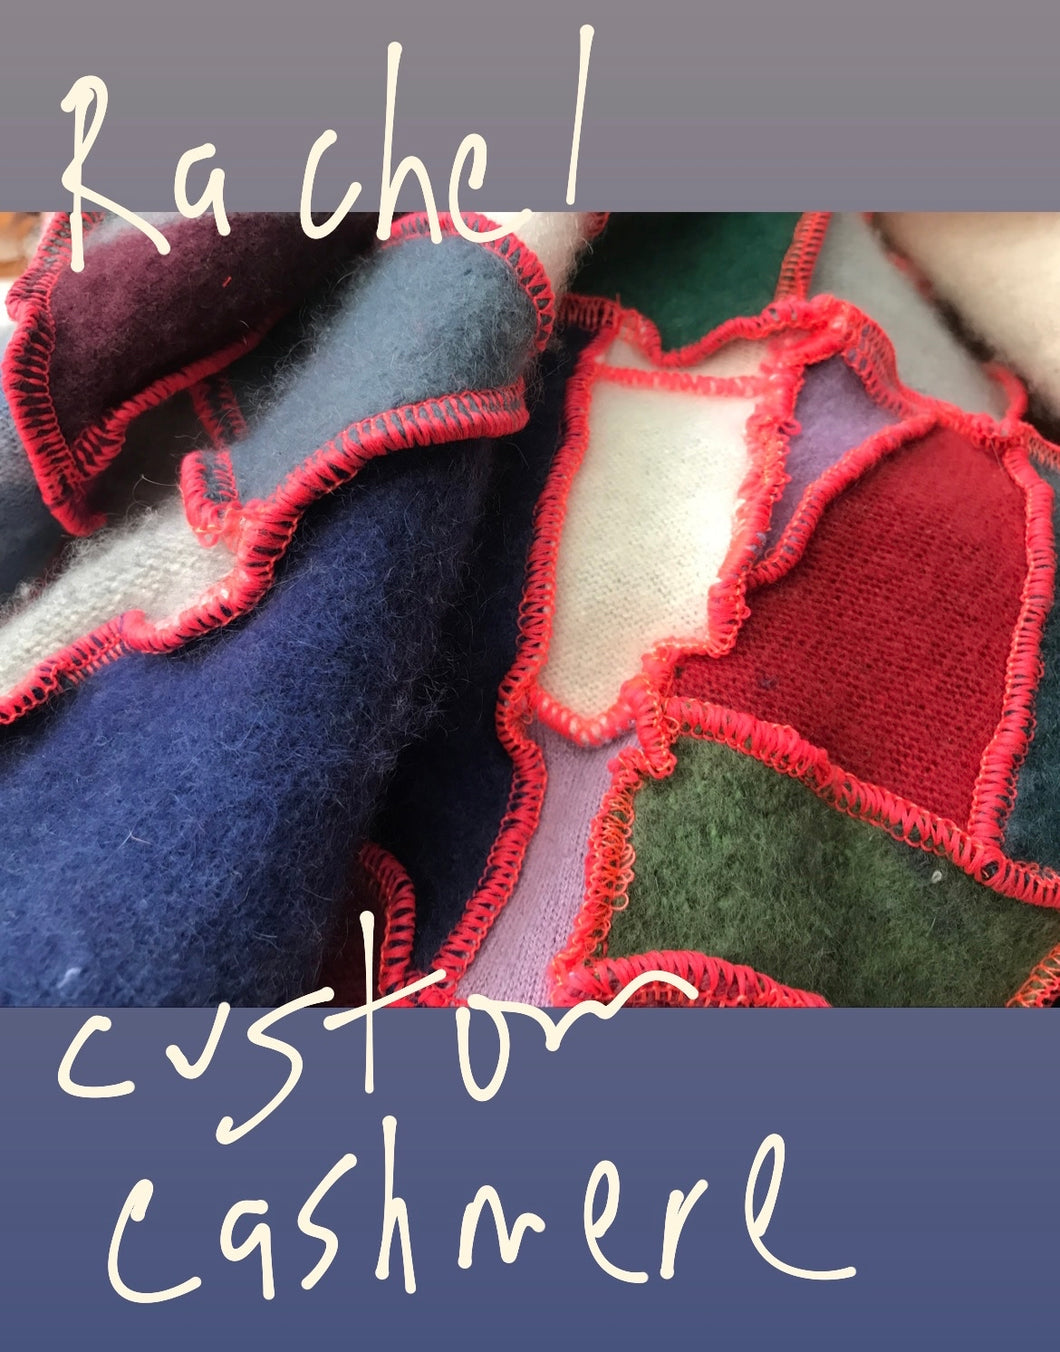 Custom for Rachel- cozy one of a kind cashmere - DEPOSIT